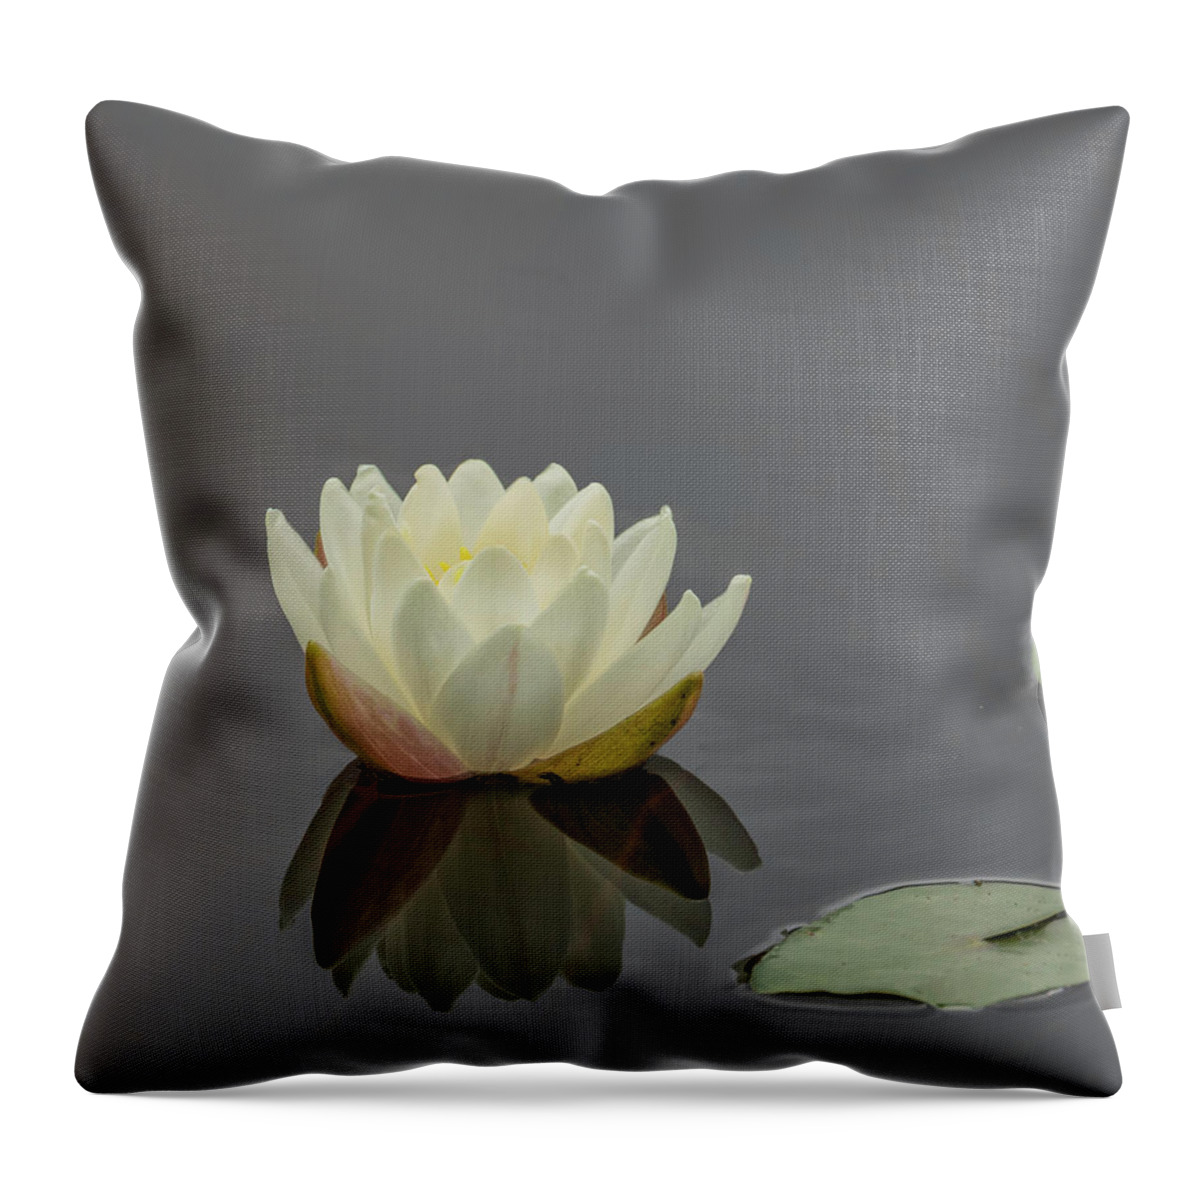 Lotus Flowers Throw Pillow featuring the photograph Lotus Flower H by Jim Dollar